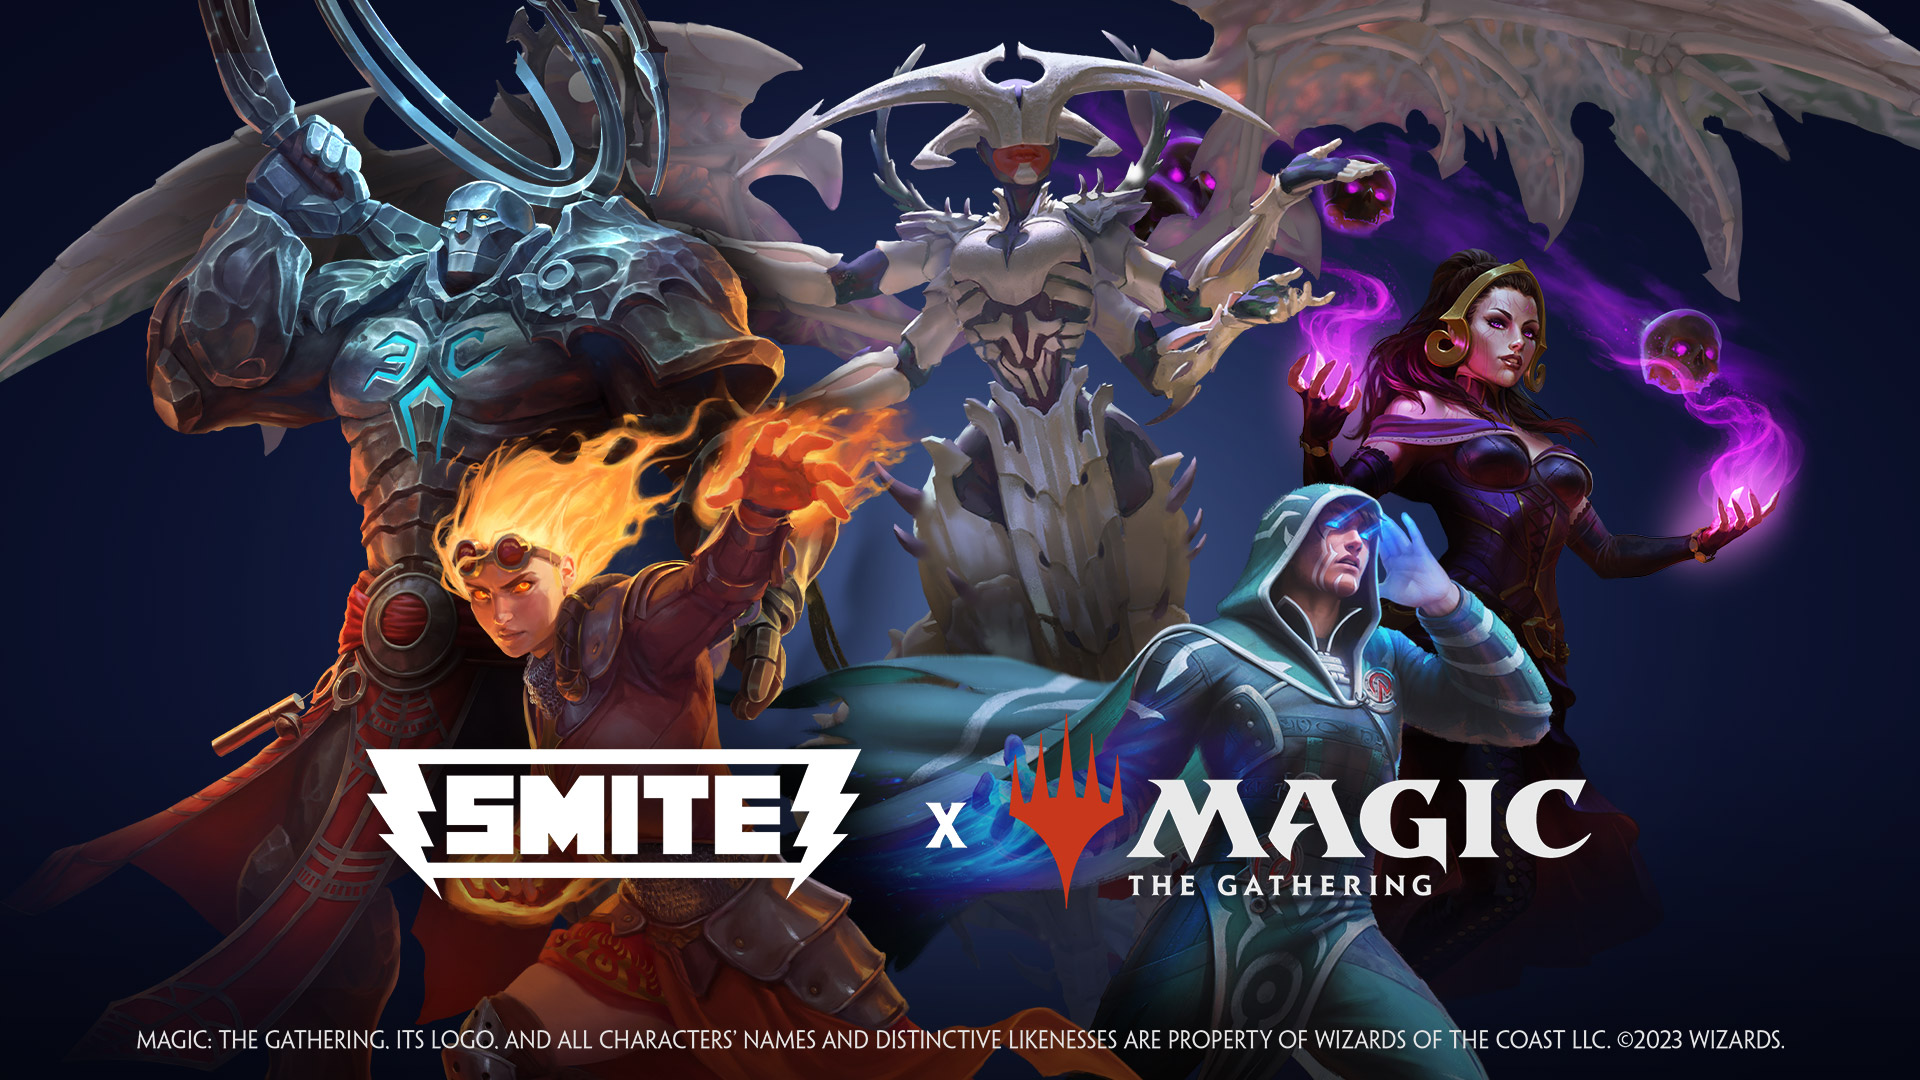 Magic: The Gathering and Smite Collide in New Season of Monsters